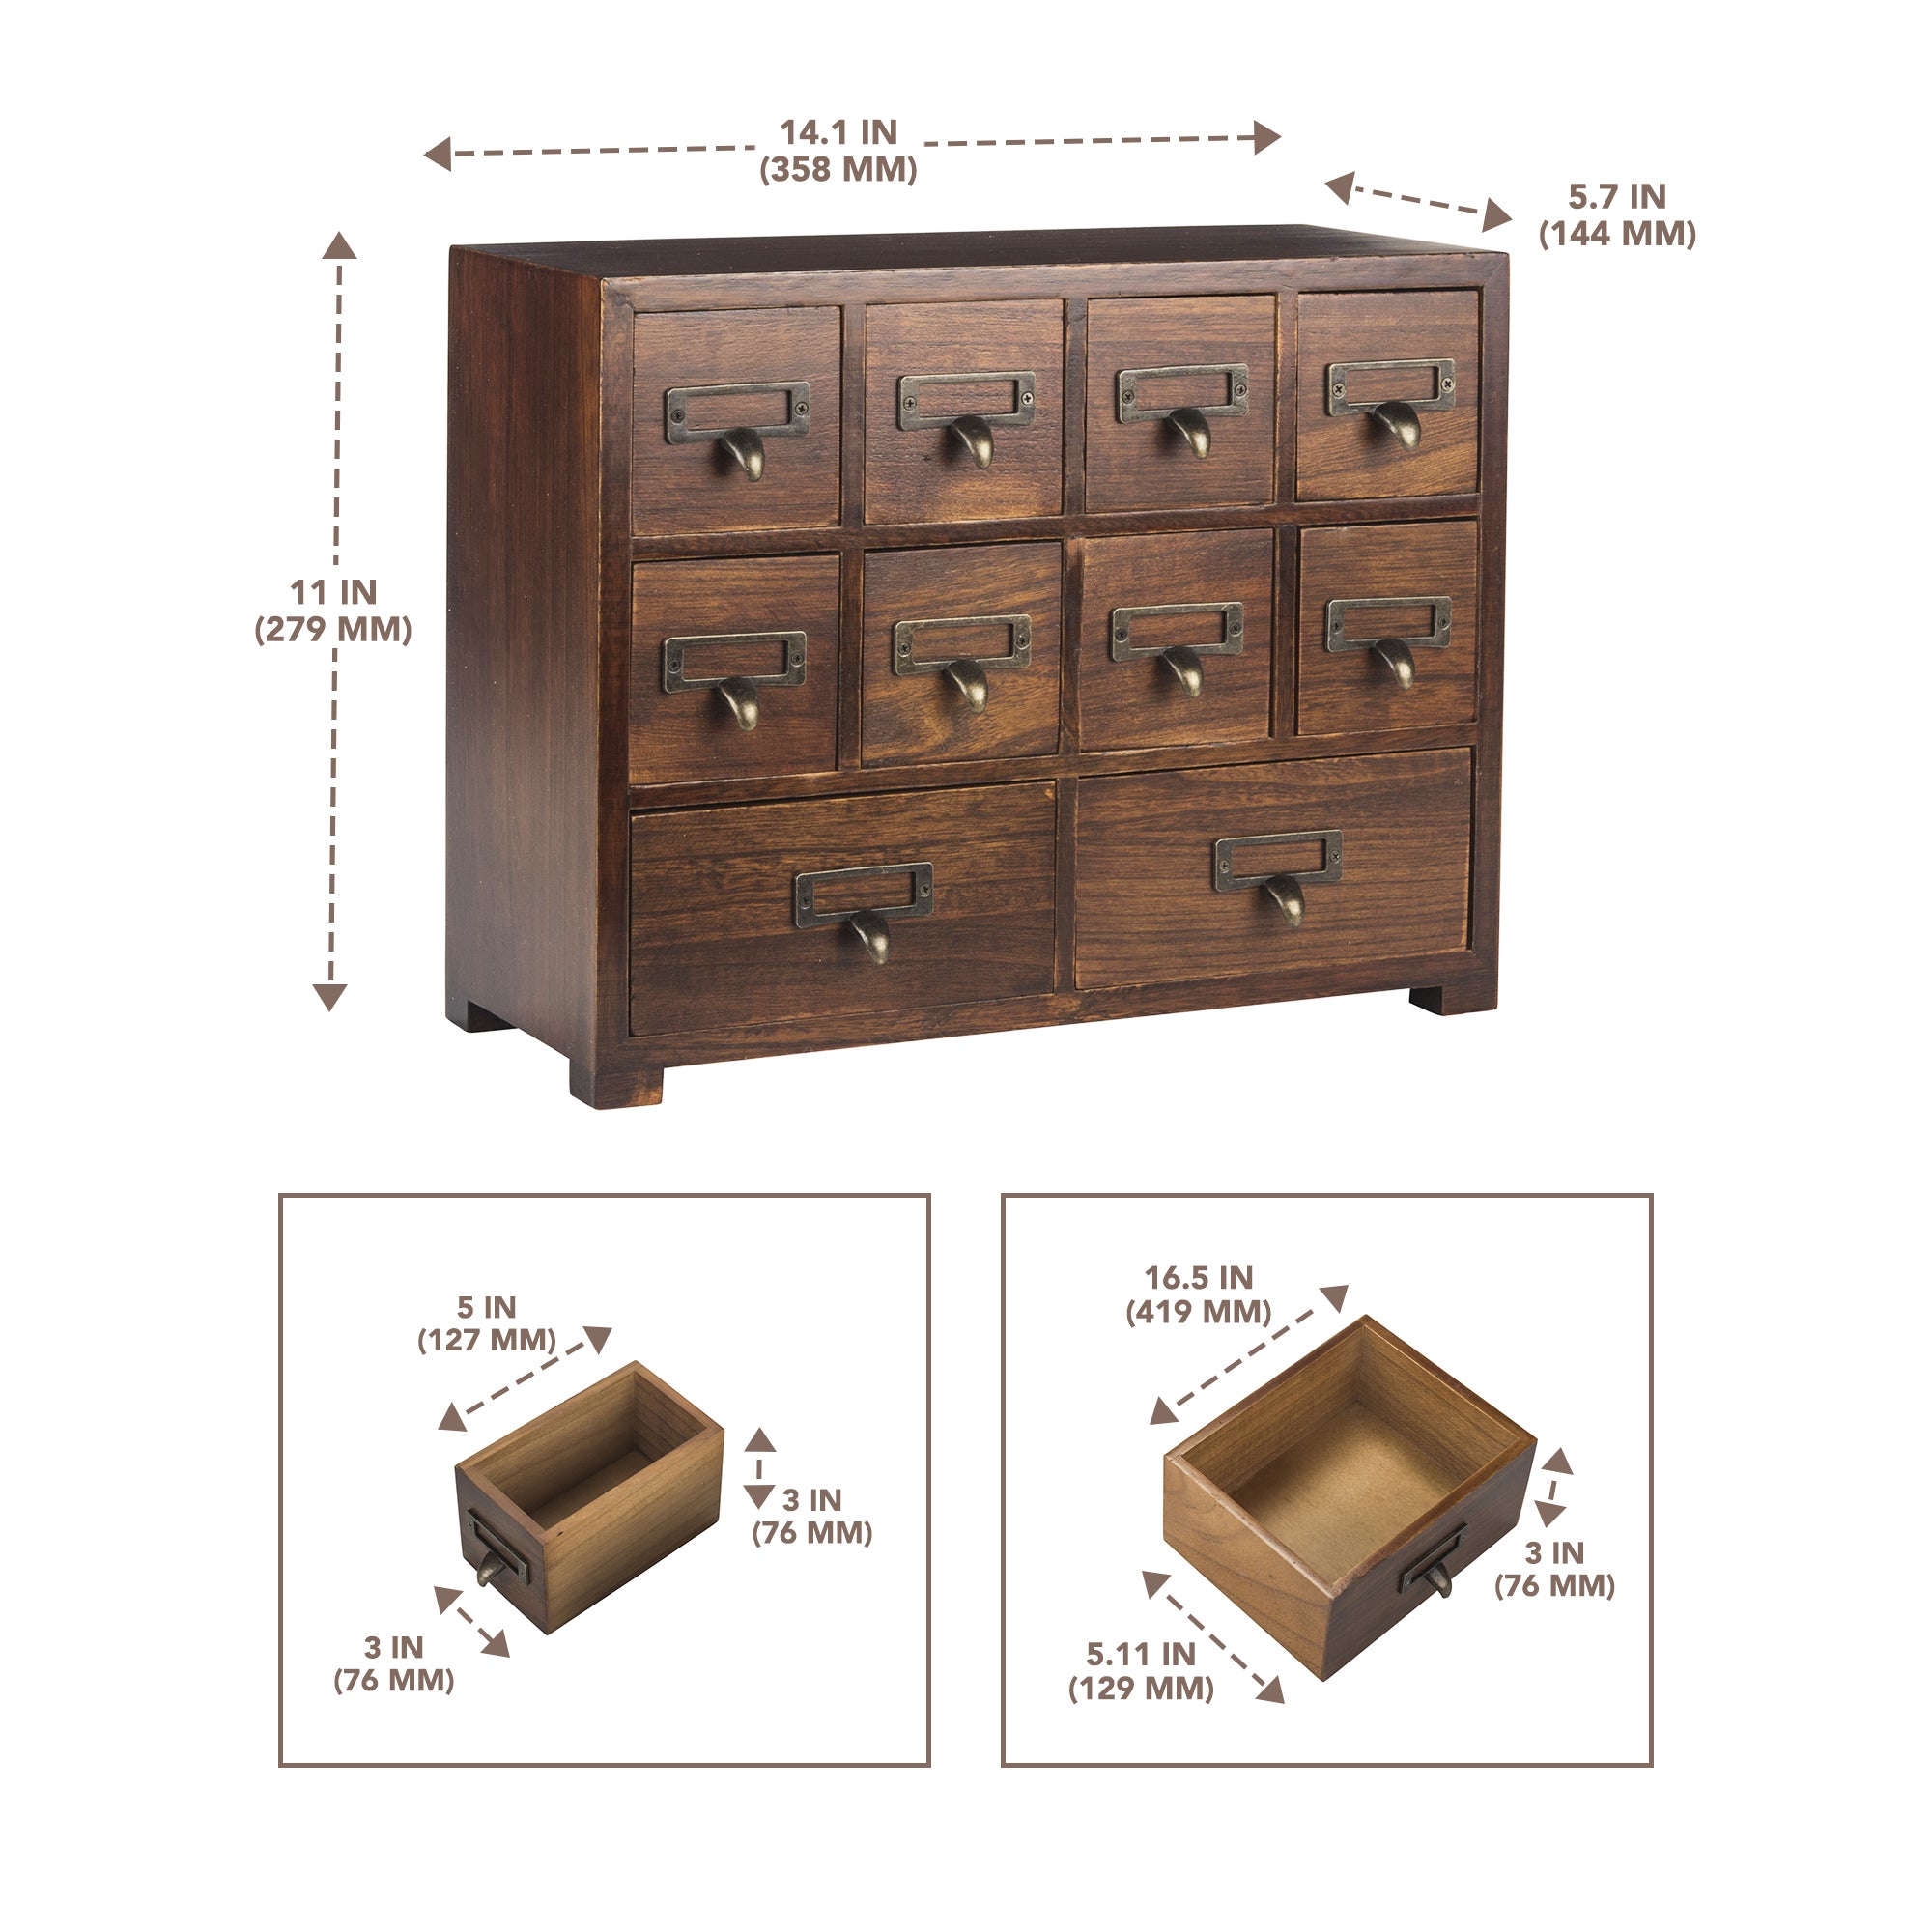 Load image into Gallery viewer, Desktop Accessory Solid Wood Medicine Drawer Cabinet | Apothecary Library Card Catalog Trinkets